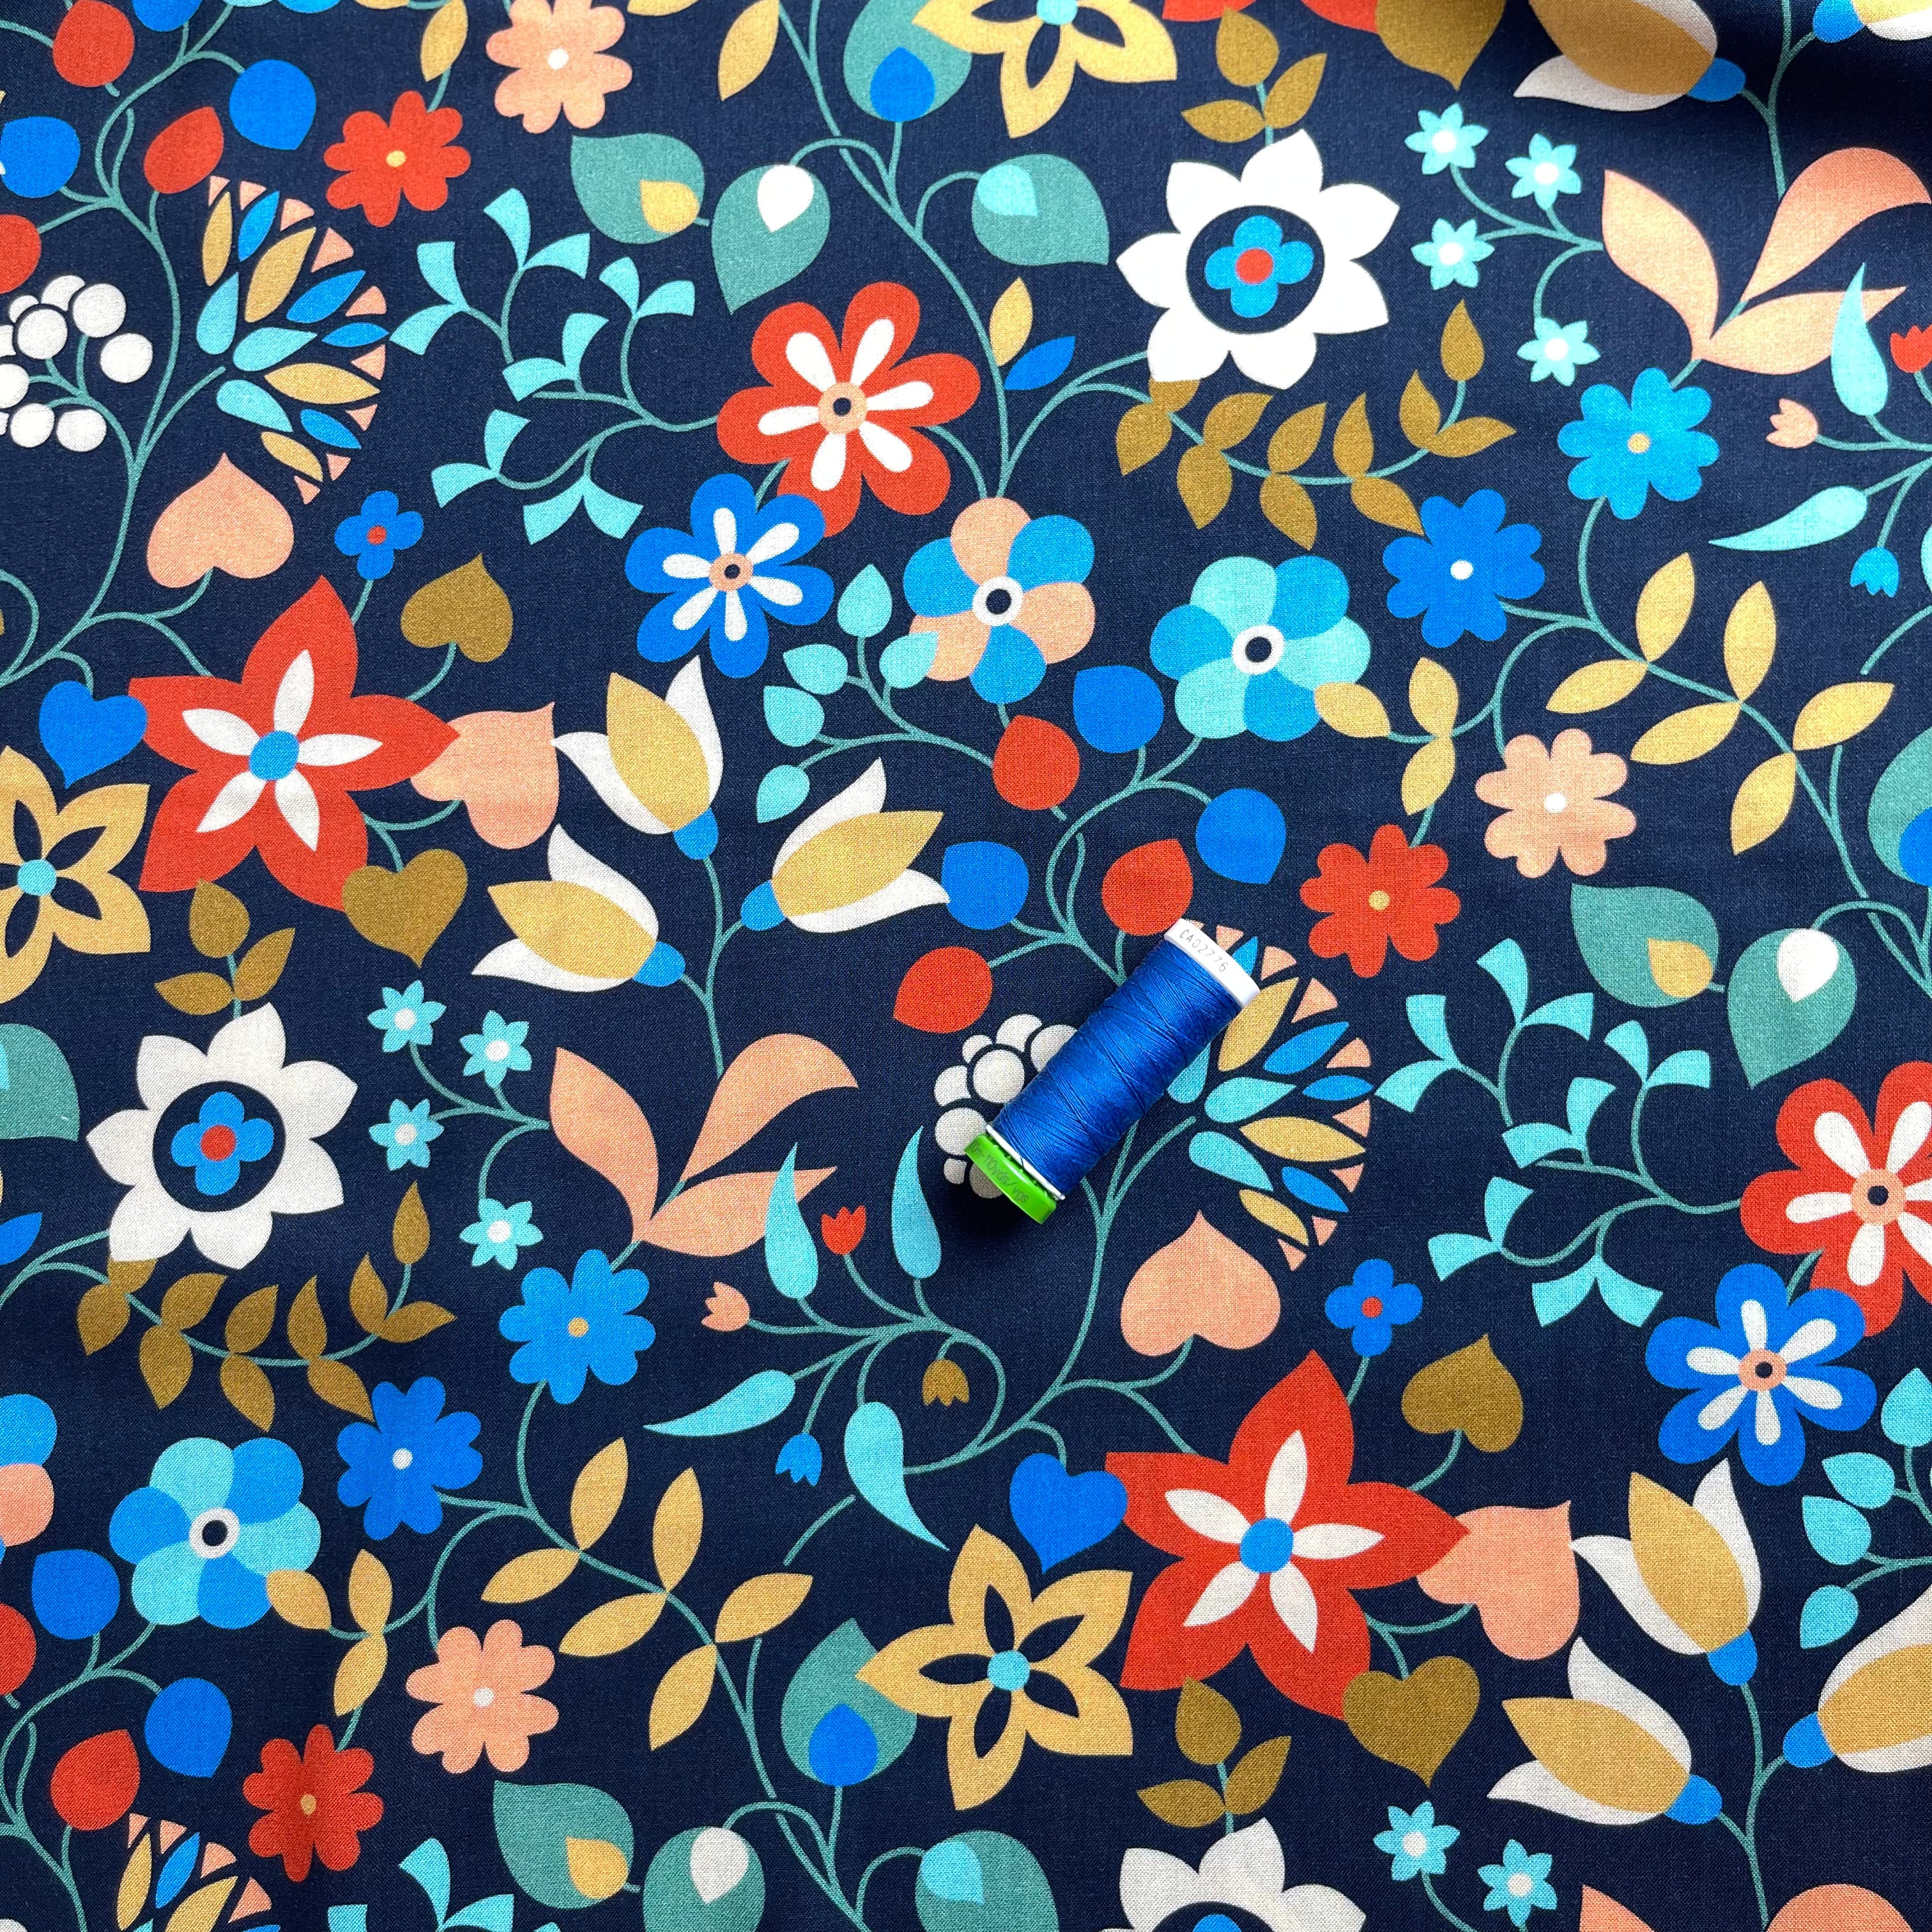 Tapestry by Sholto Drumlanrig in Denim Rayon Fabric